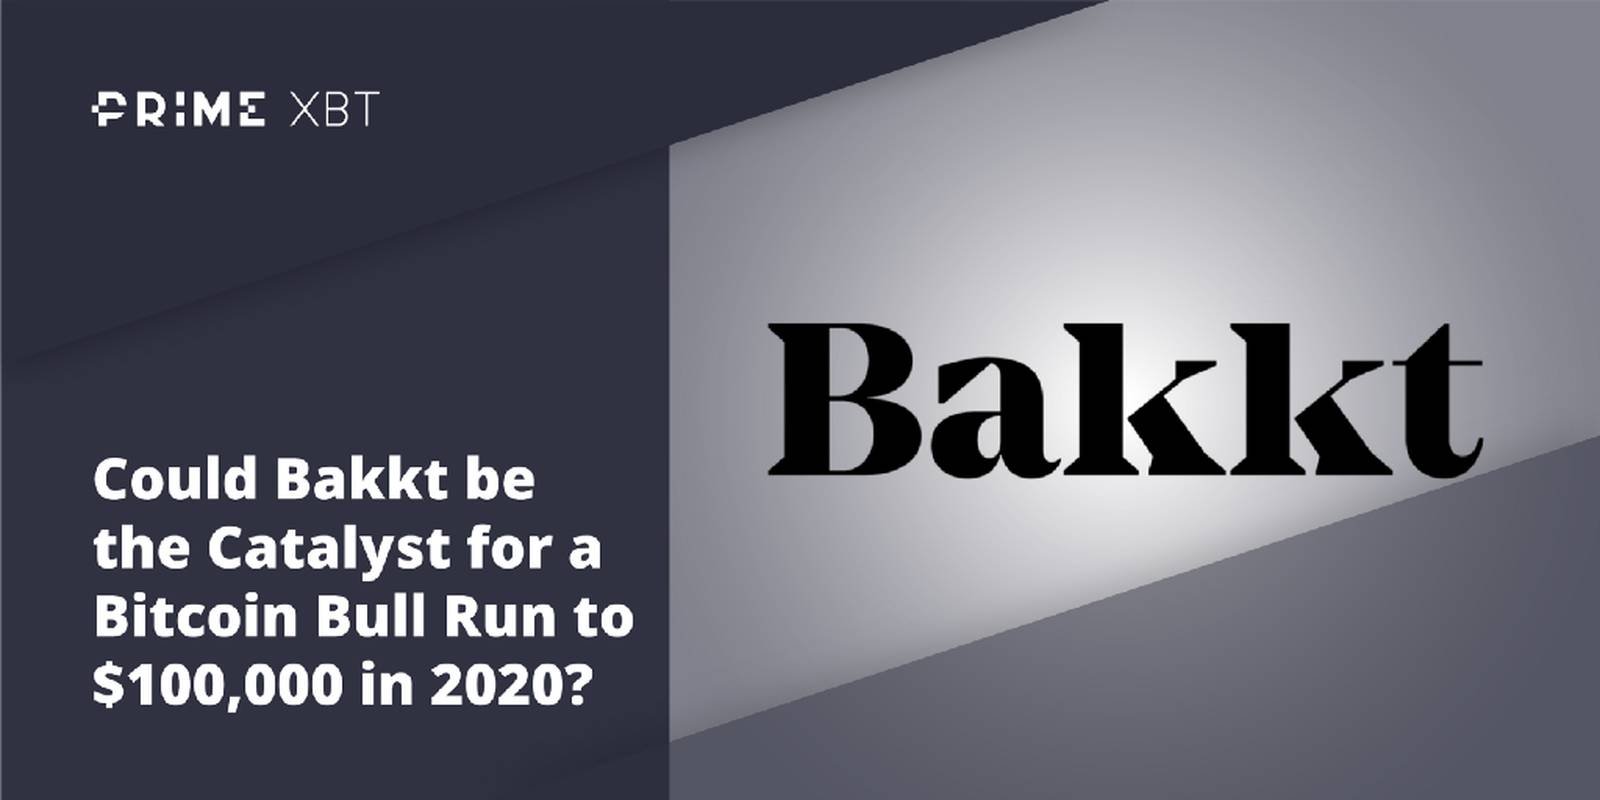 Could Bakkt be the Catalyst for a Bitcoin Bull Run to $100,000 in 2020? - 1 8bZWKaXAmqk39hkAA3cLHw